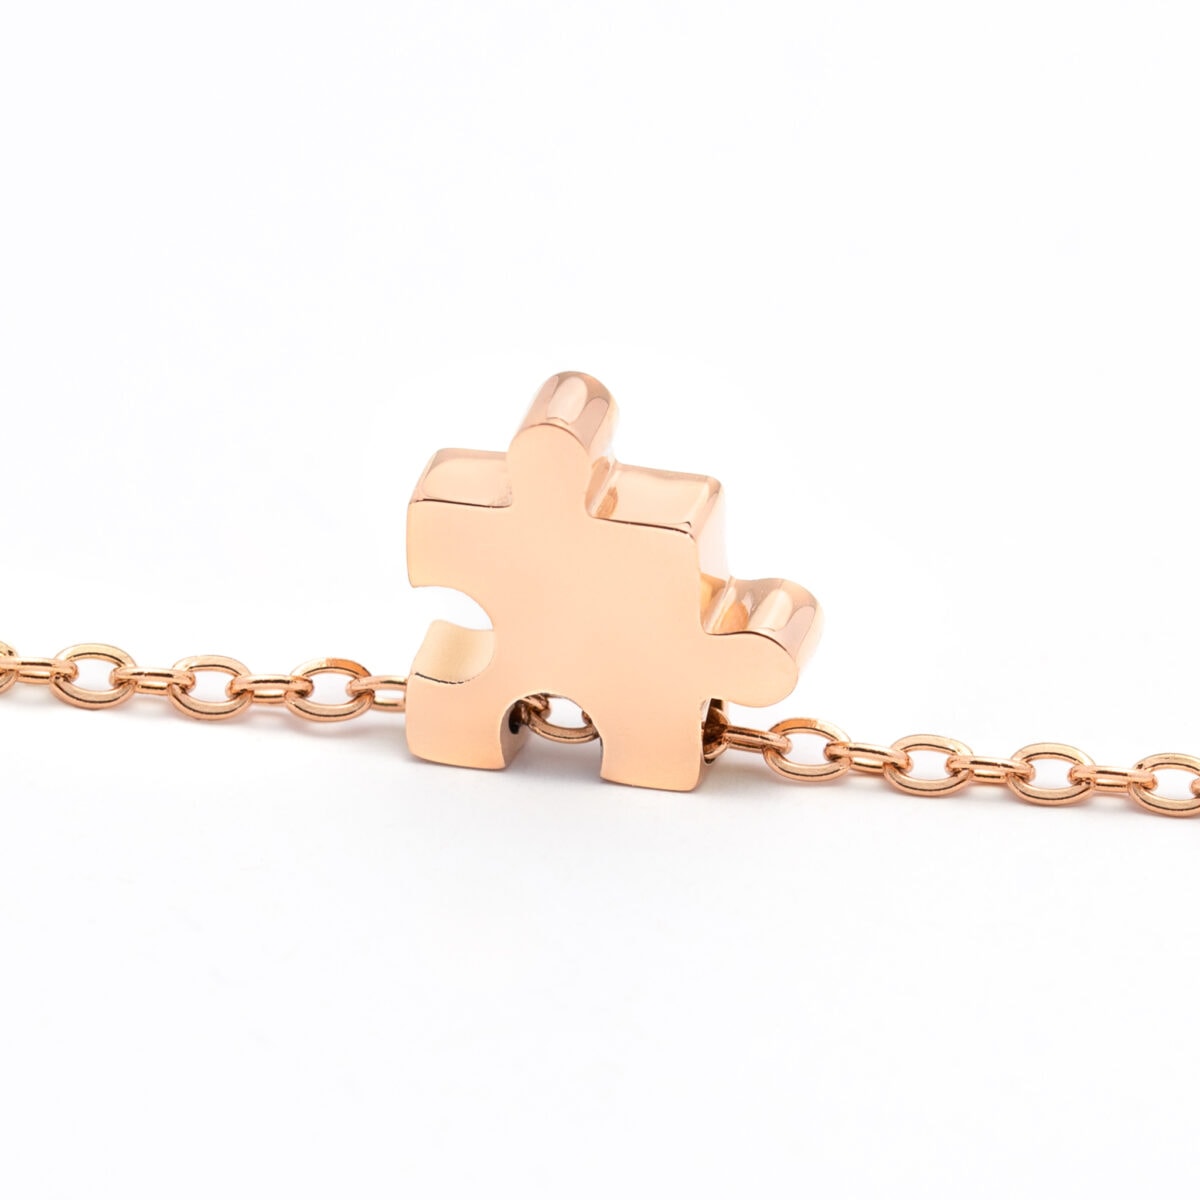 https://m.clubbella.co/product/duna-rose-gold-puzzle-charm-necklace/ Duna Puzzle Rose Gold (3)